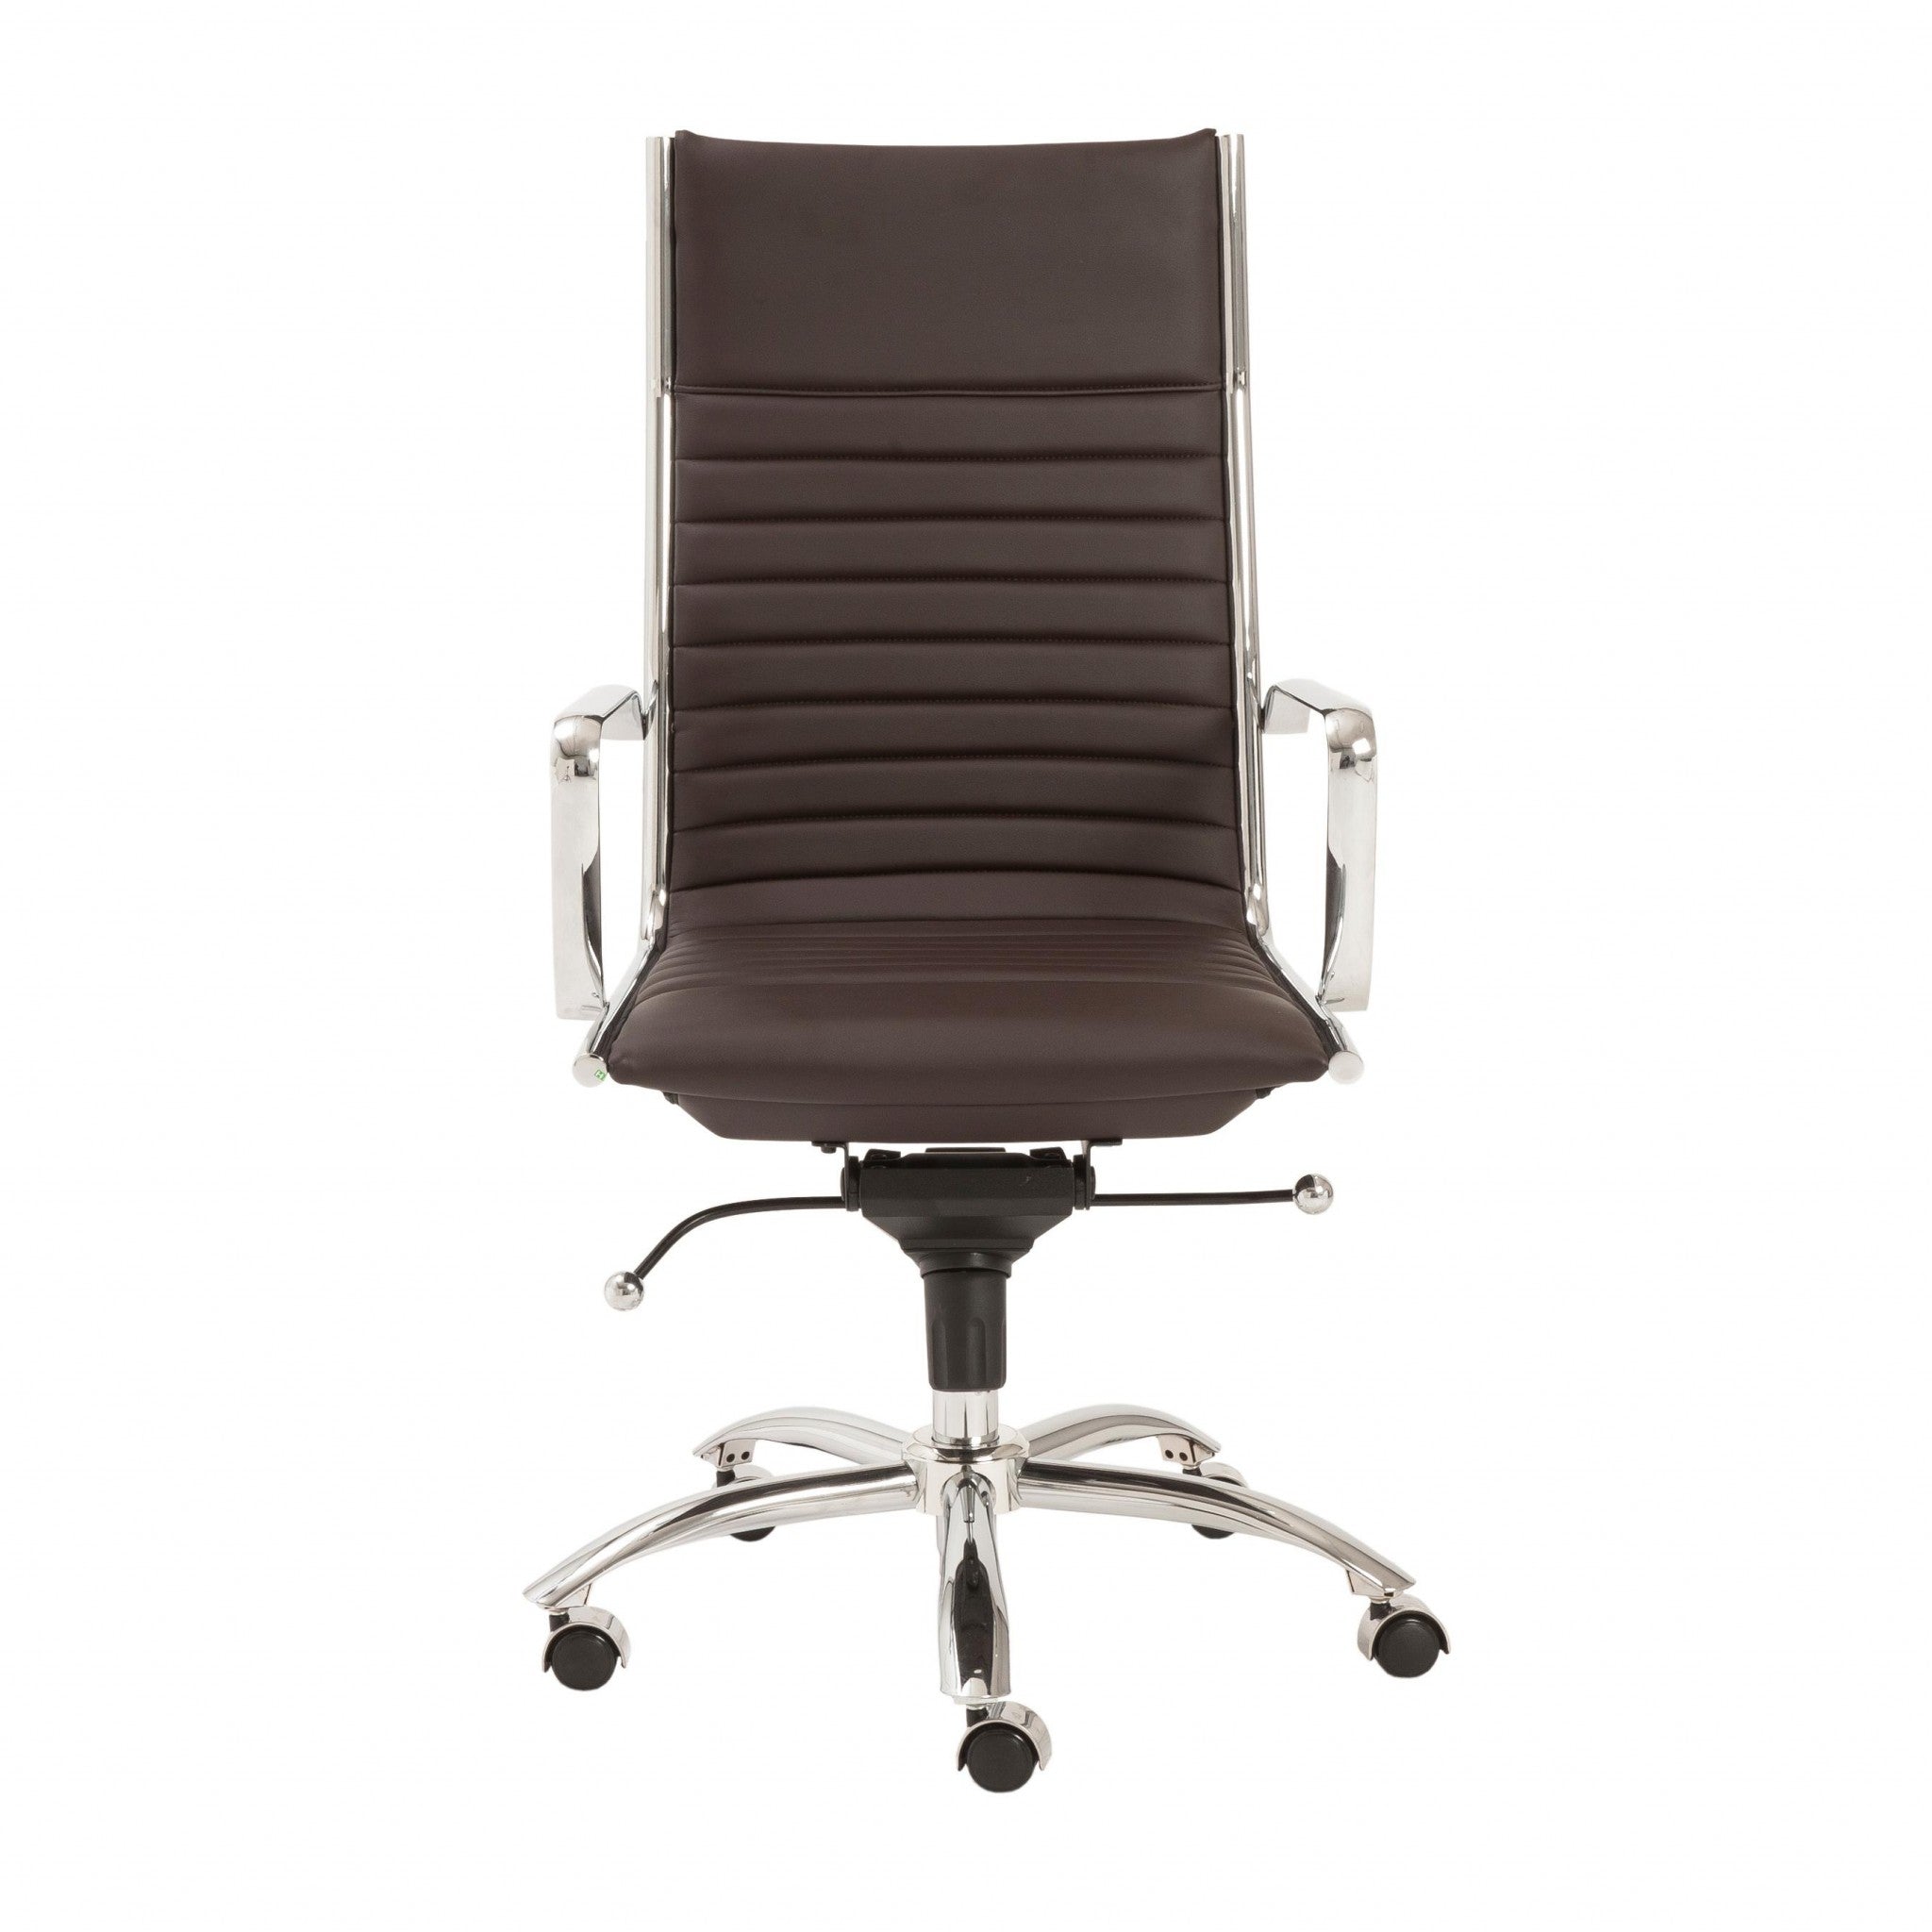 Brown-Faux-Leather-Seat-Swivel-Adjustable-Task-Chair-Leather-Back-Steel-Frame-Office-Chairs